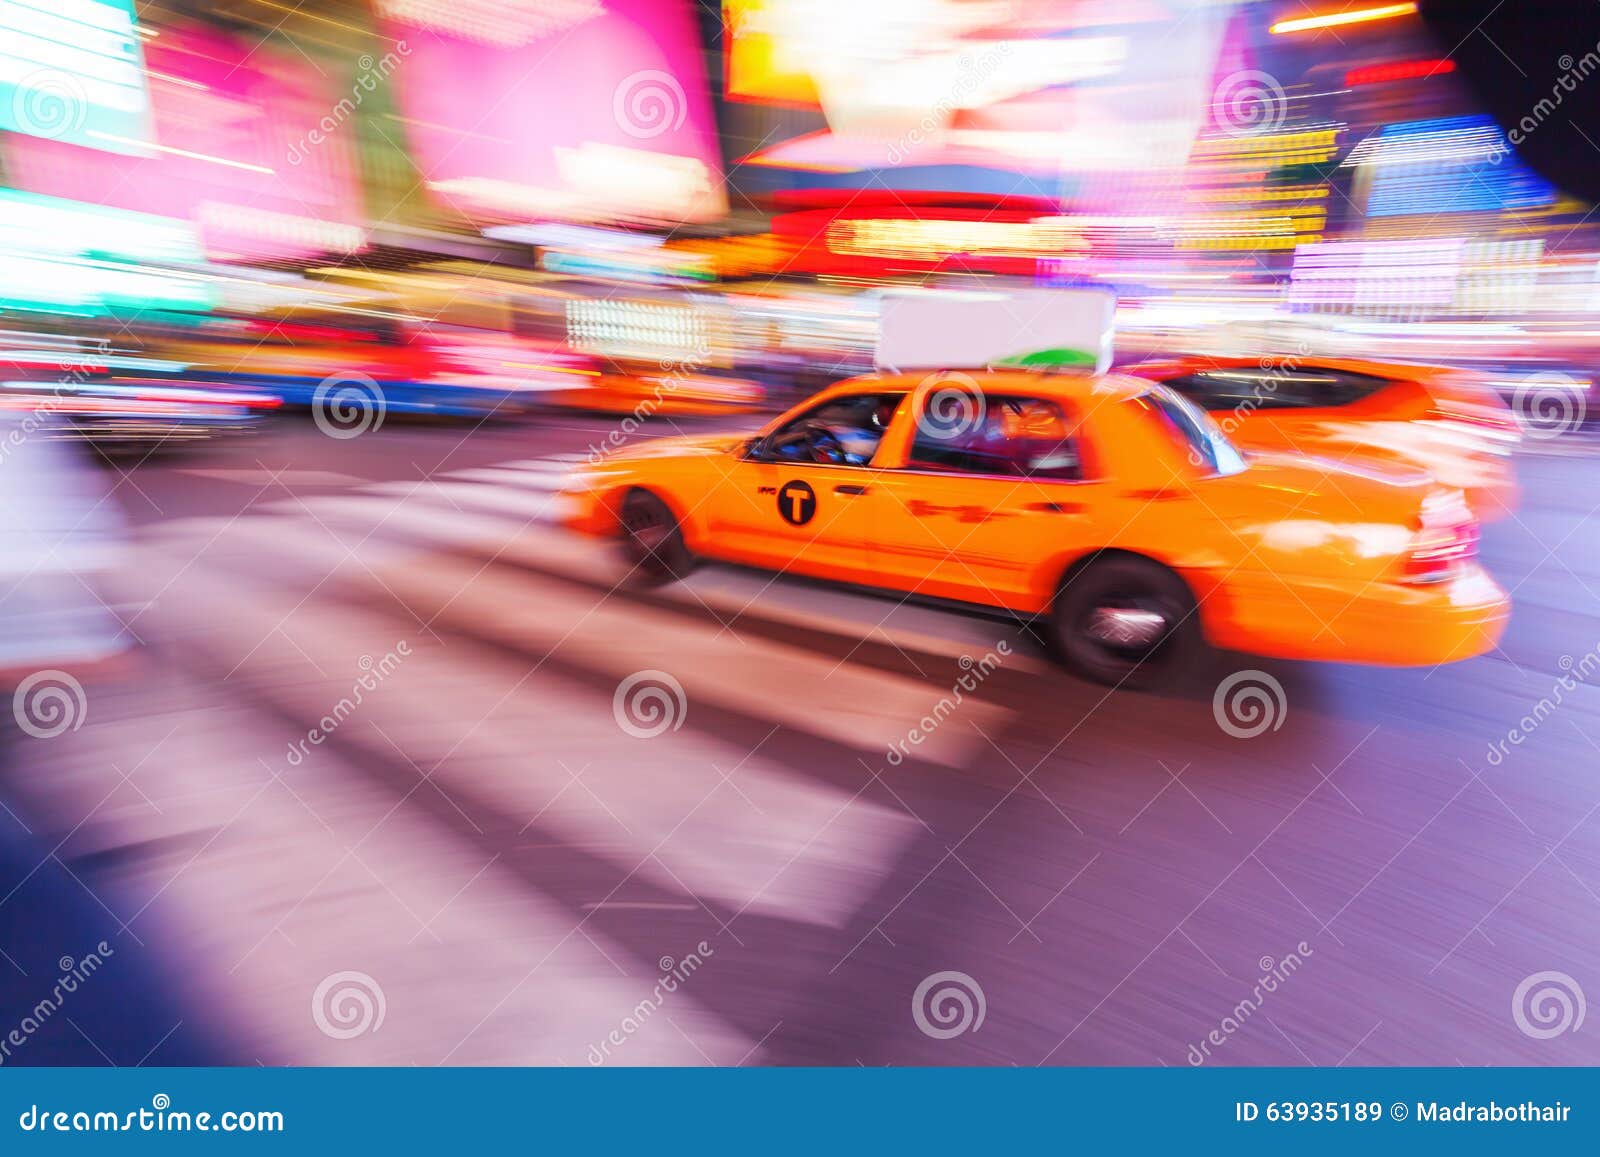 yellow cab in nyc in motion blur